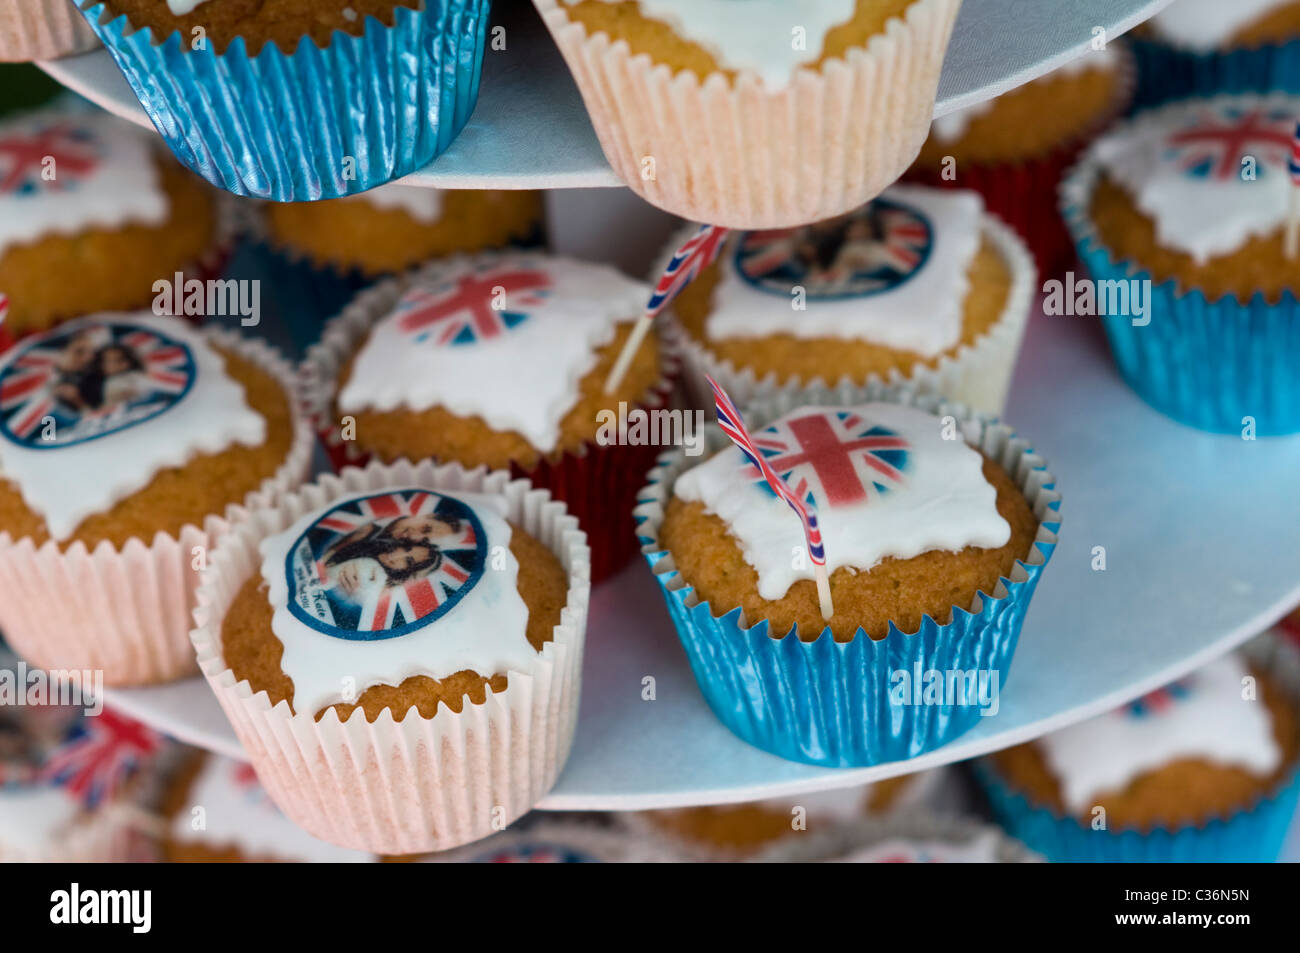 Cakes with the faces of Prince William and Catherine Middleton for Royal Wedding Celebration in Banham, Norfolk Stock Photo